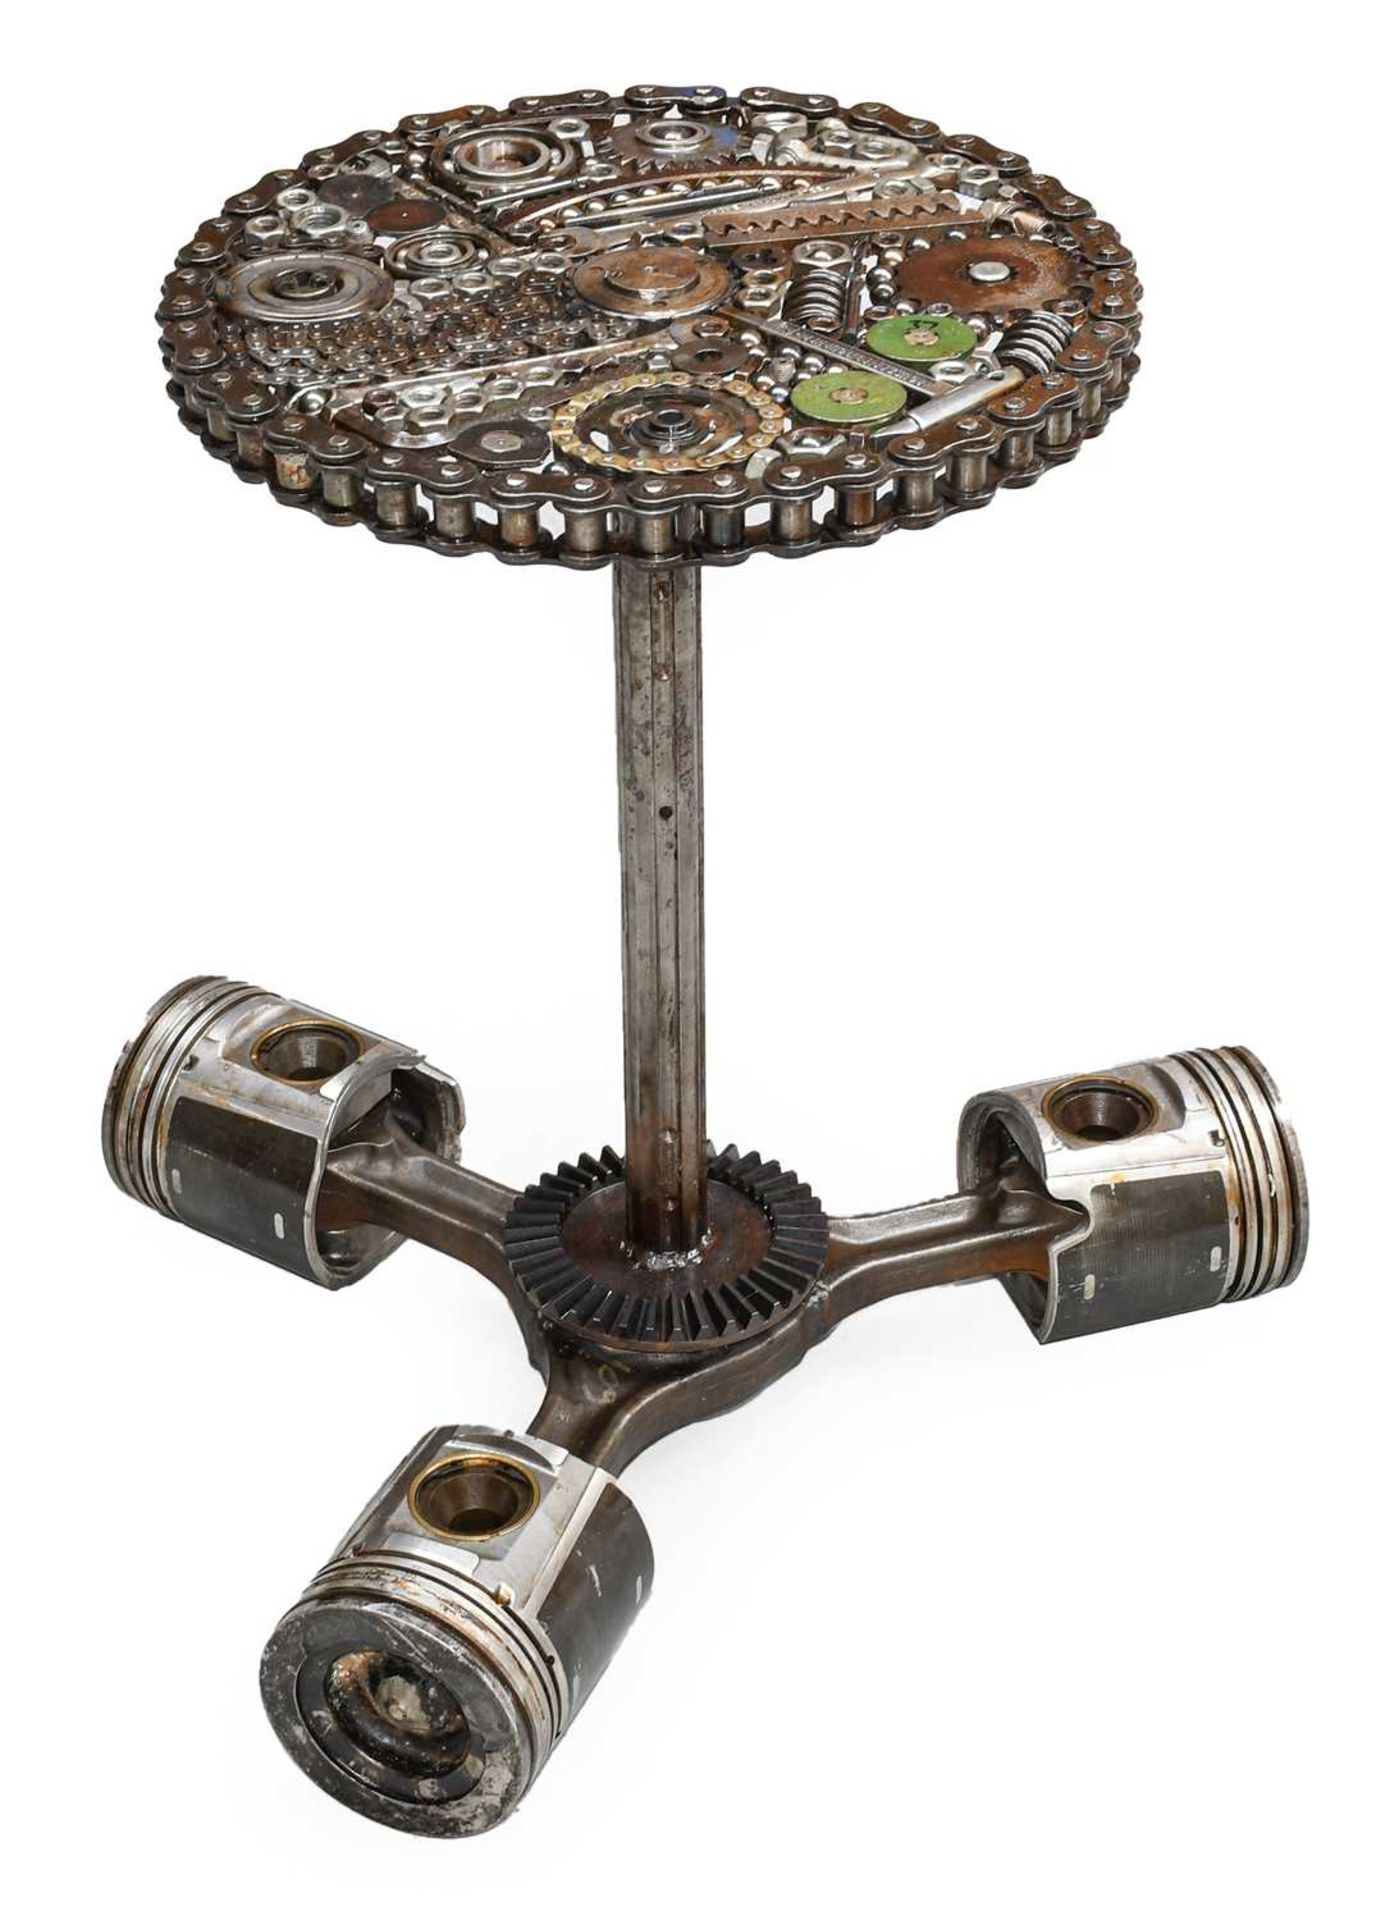 Steampunk: A Bespoke Tripod Table, made from spanners, nuts, bolts and chain rings, of circular form